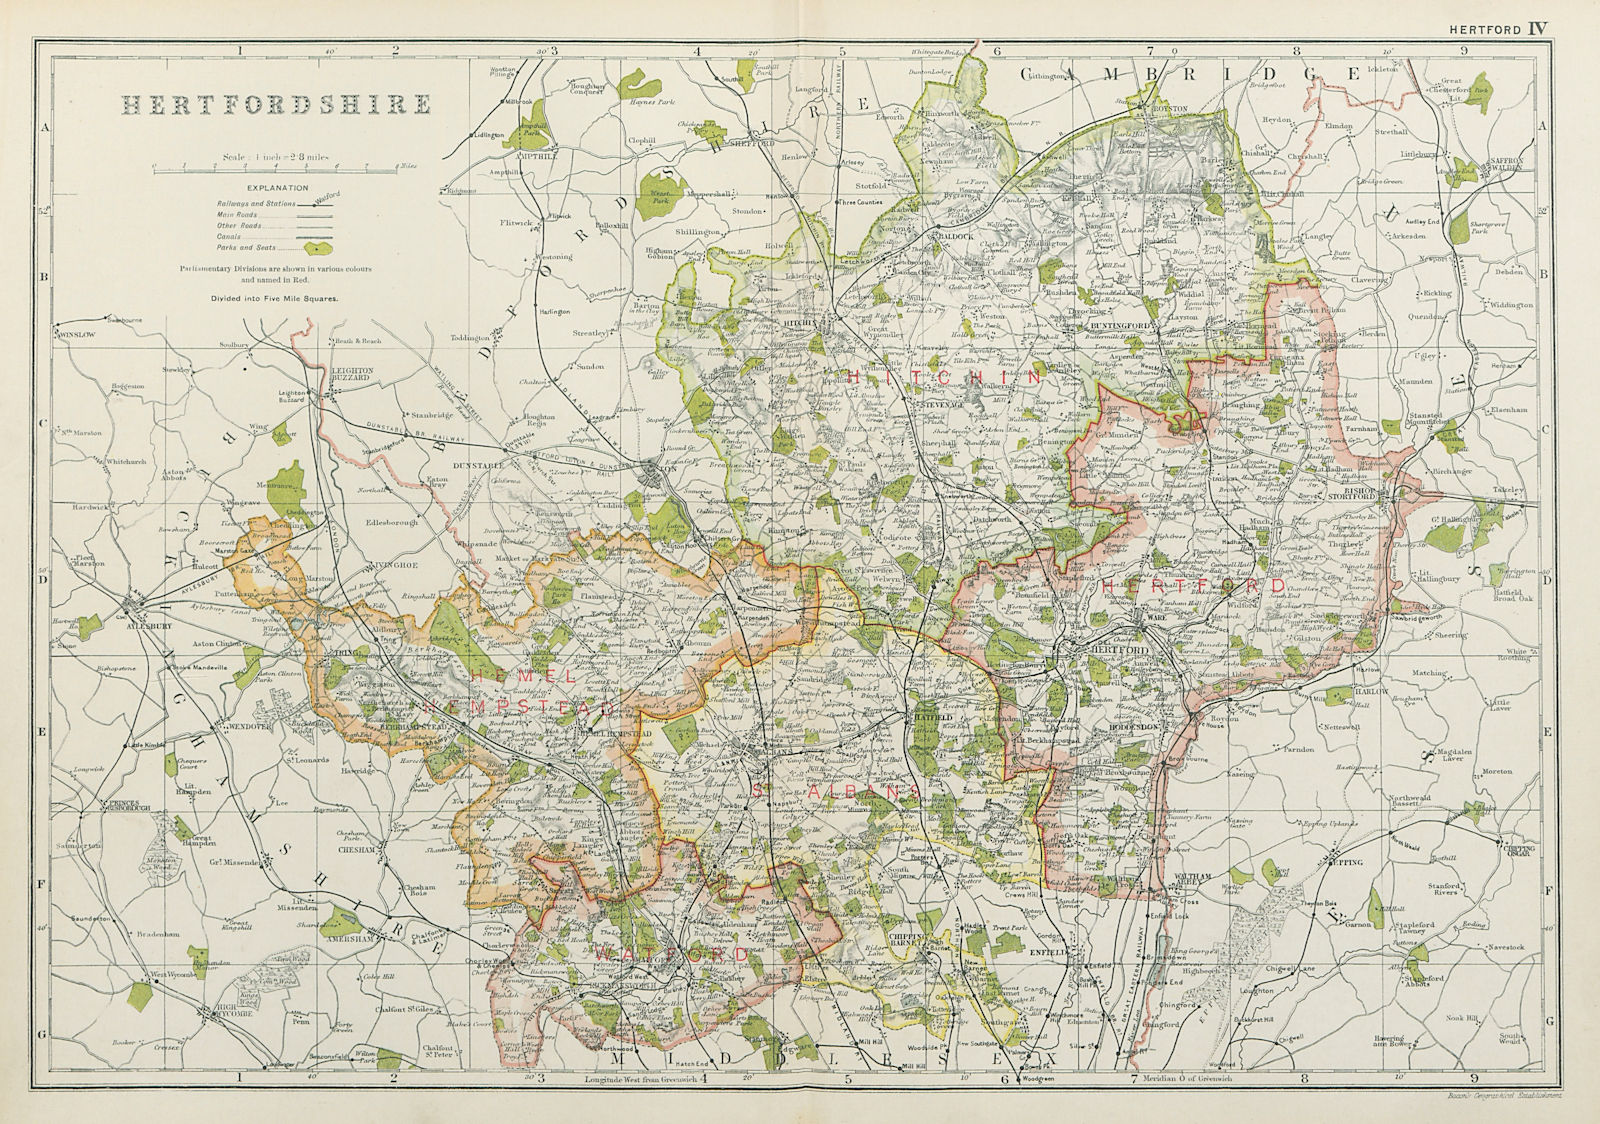 HERTFORDSHIRE. Showing Parliamentary divisions, boroughs & parks. BACON 1920 map